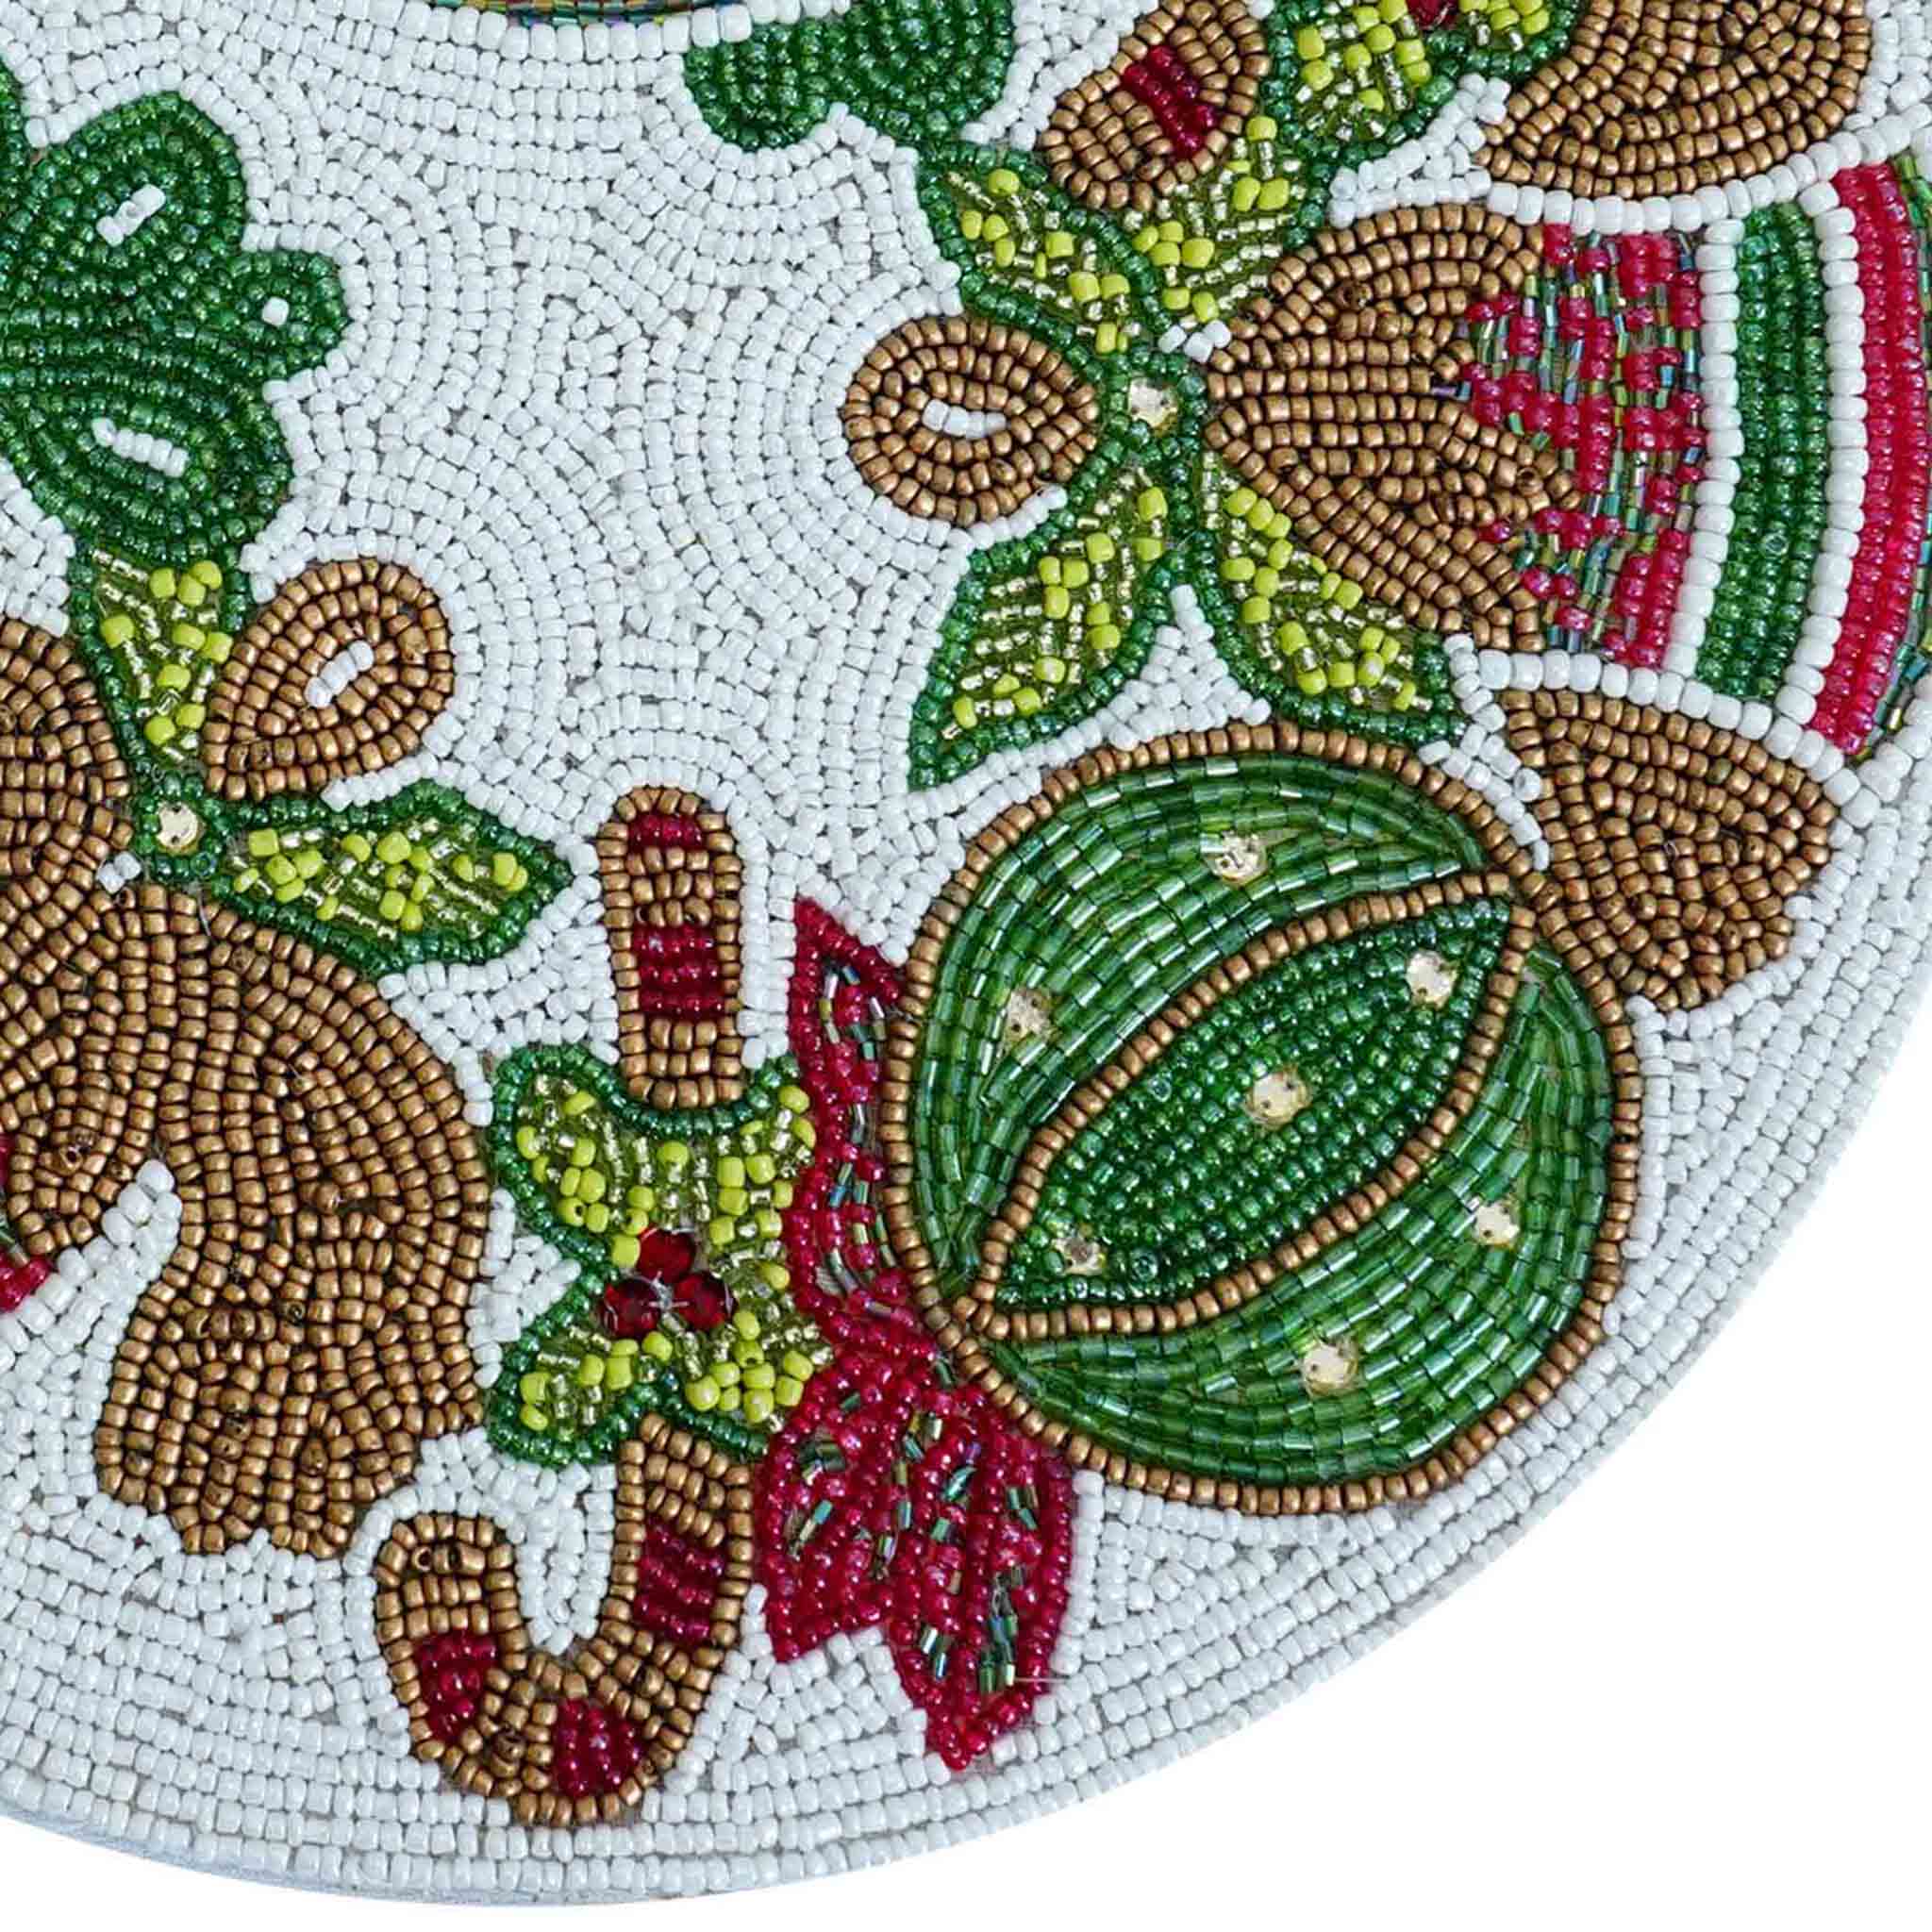 Jingle Balls Bead Embroidered Placemat in White, Red & Green, Set of 2/4